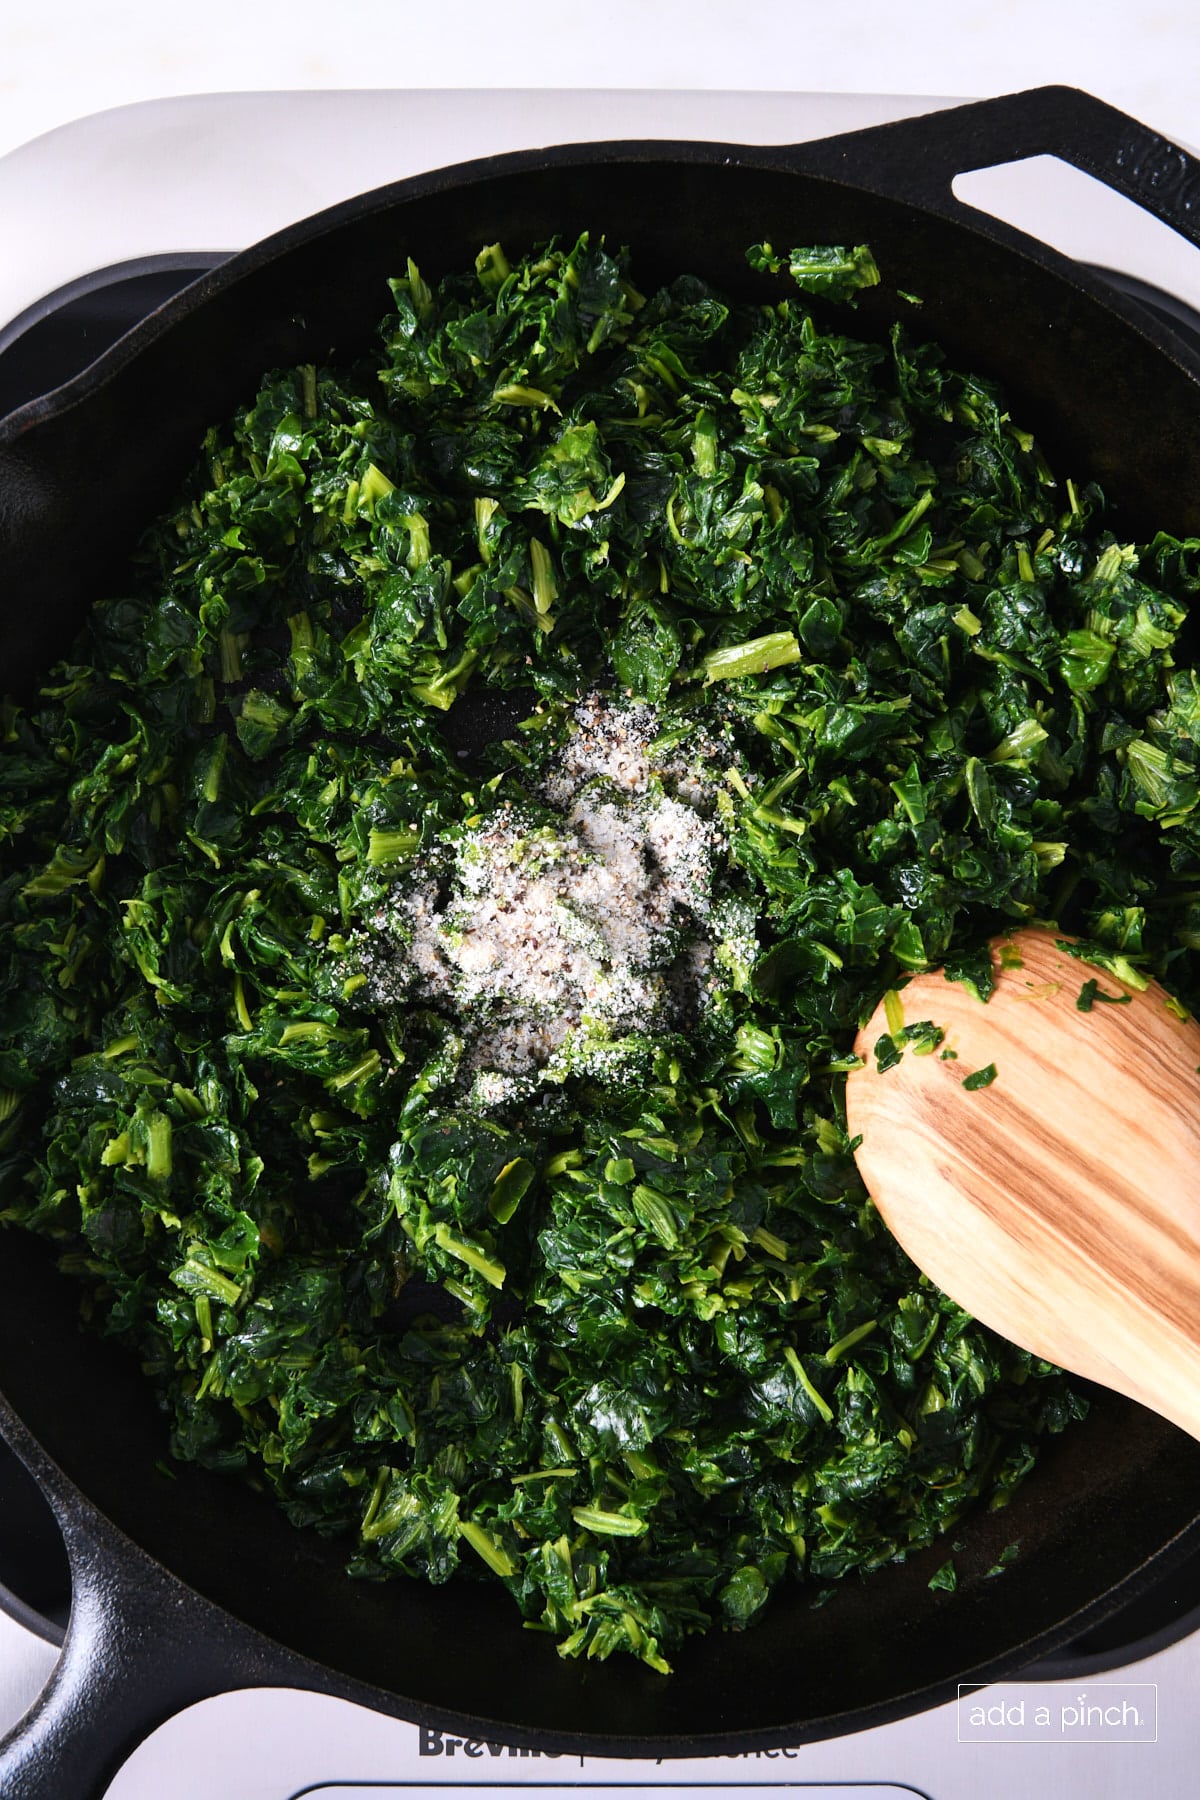 Seasoning added to spinach in a skillet with a wooded spoon.